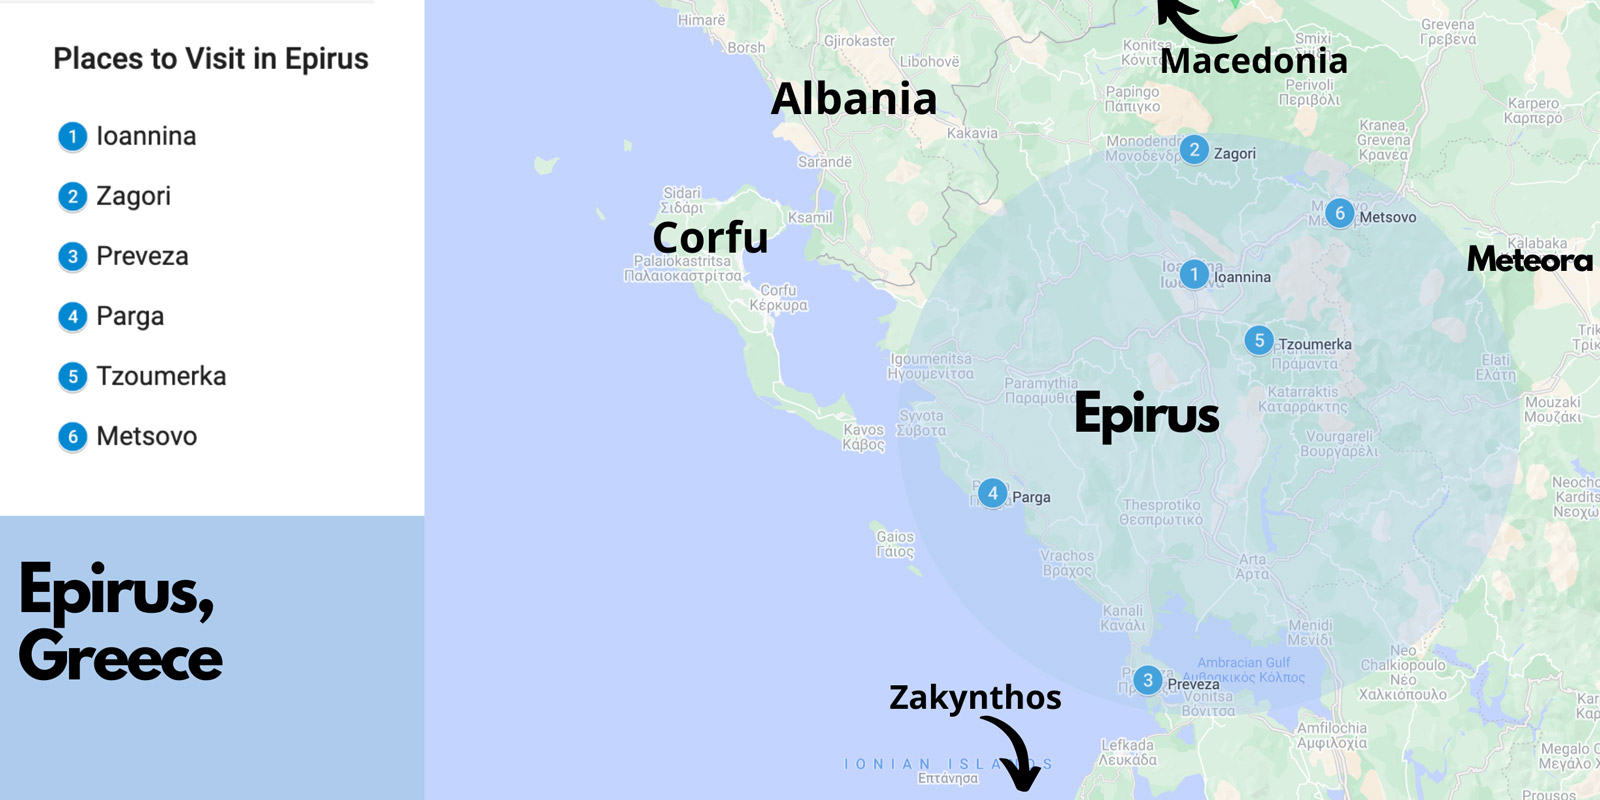 places to visit in epirus greece map